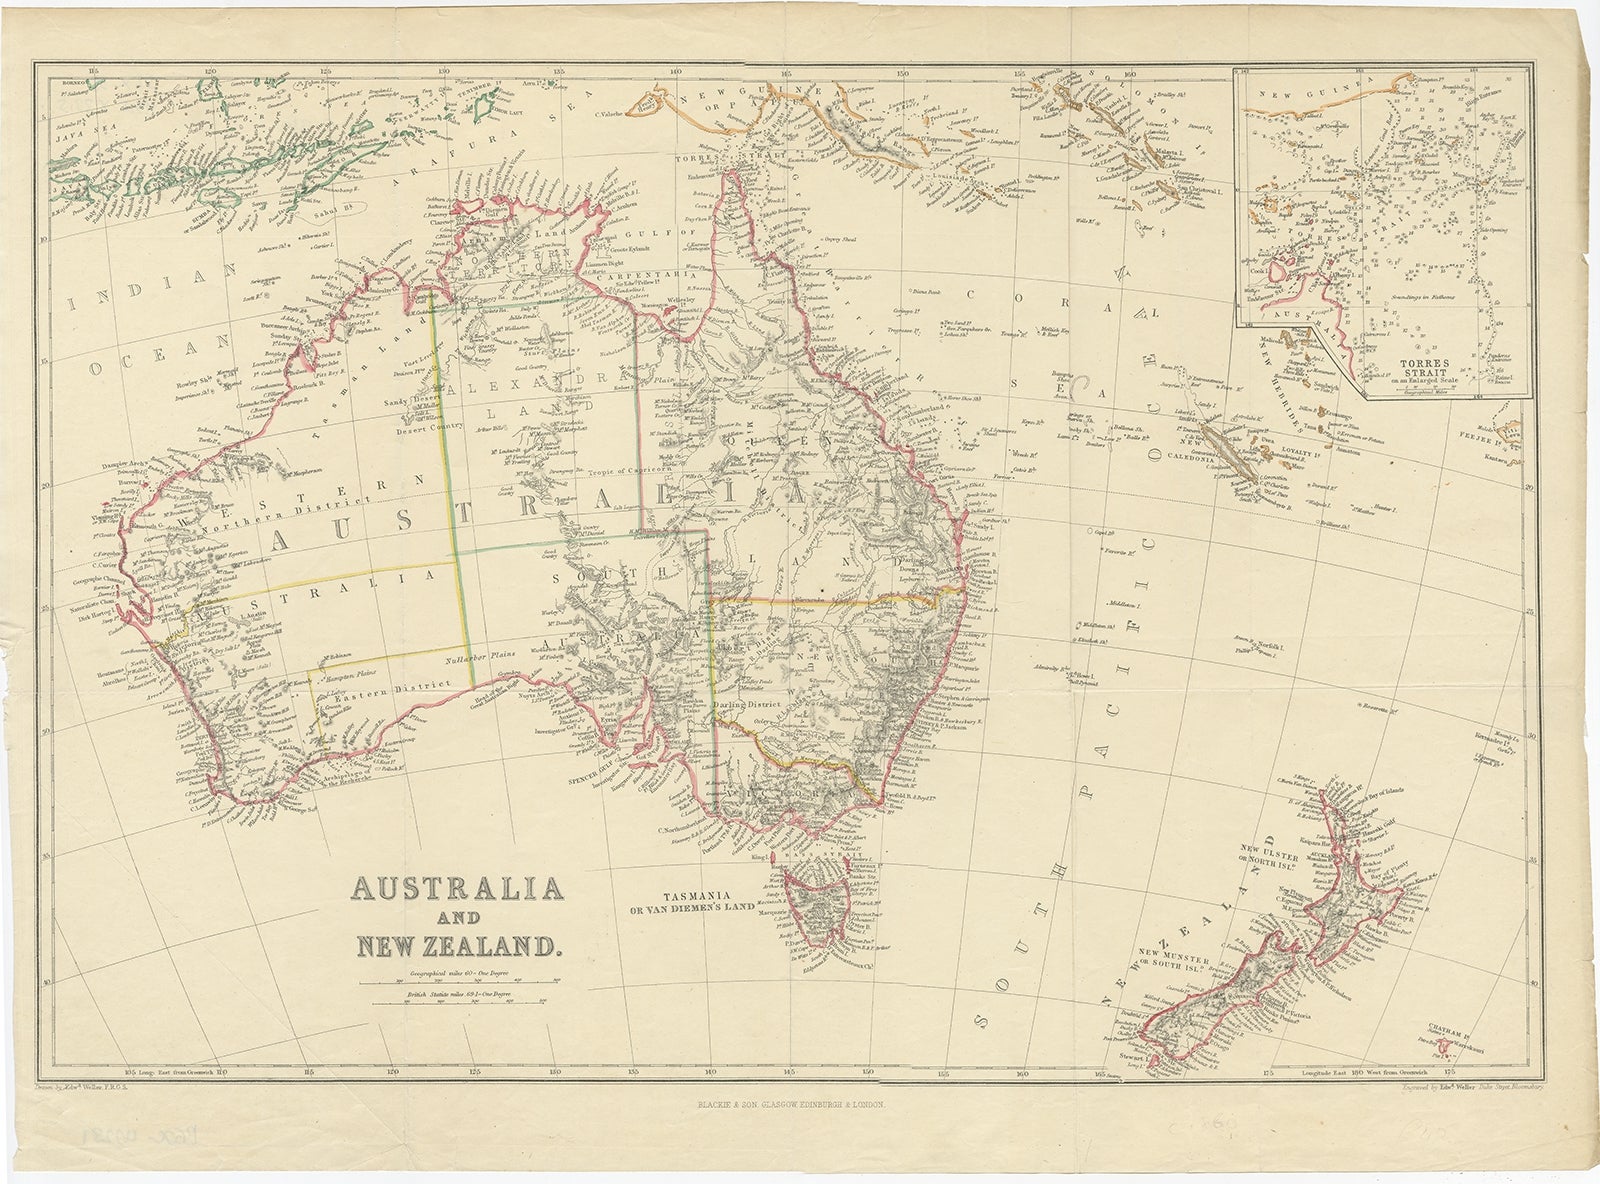 Antique map titled 'Australia and New Zealand'. Unusual edition of this map of Australia and New Zealand, on very thin paper and multiple folding lines. Source unknown, to be determined.

Artists and Engravers: Engraved by E. Weller. Published by